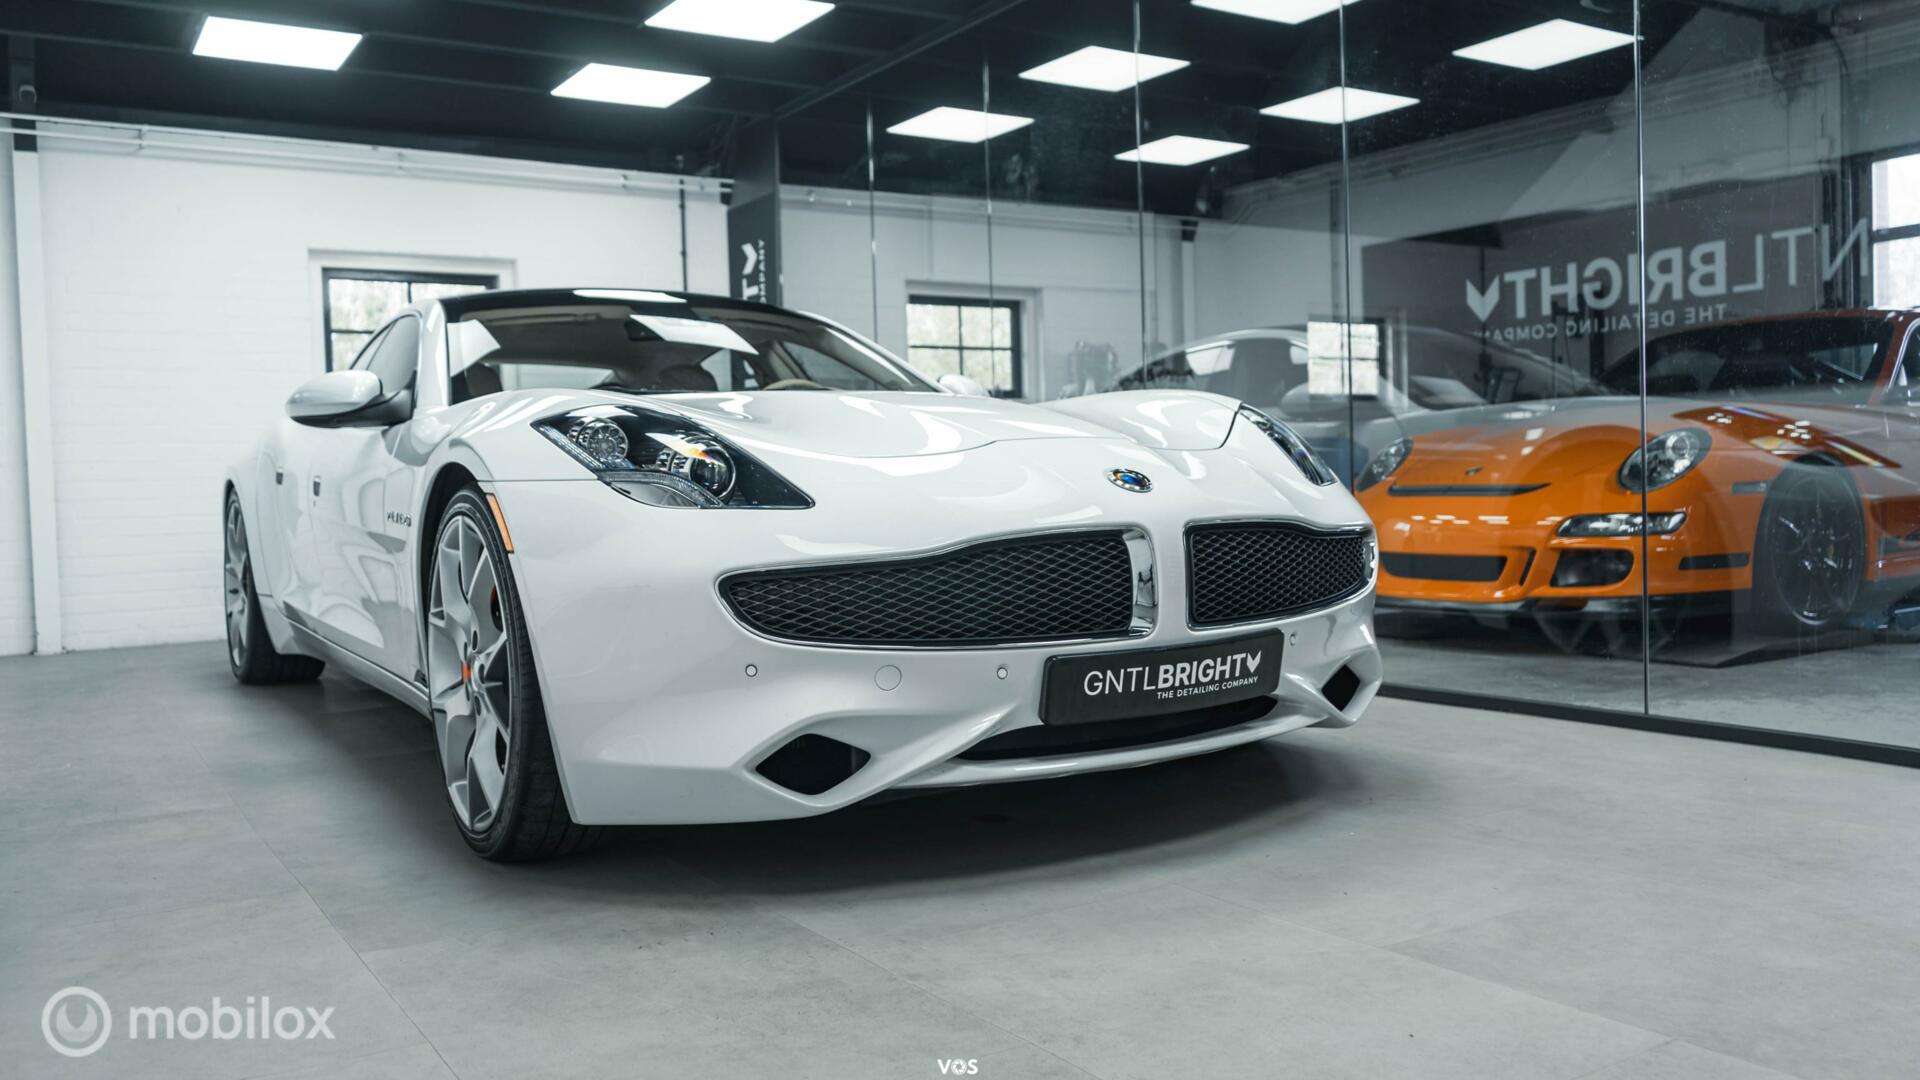 FISKER Karma Other in White used in AMSTERDAM for € 94,500.-